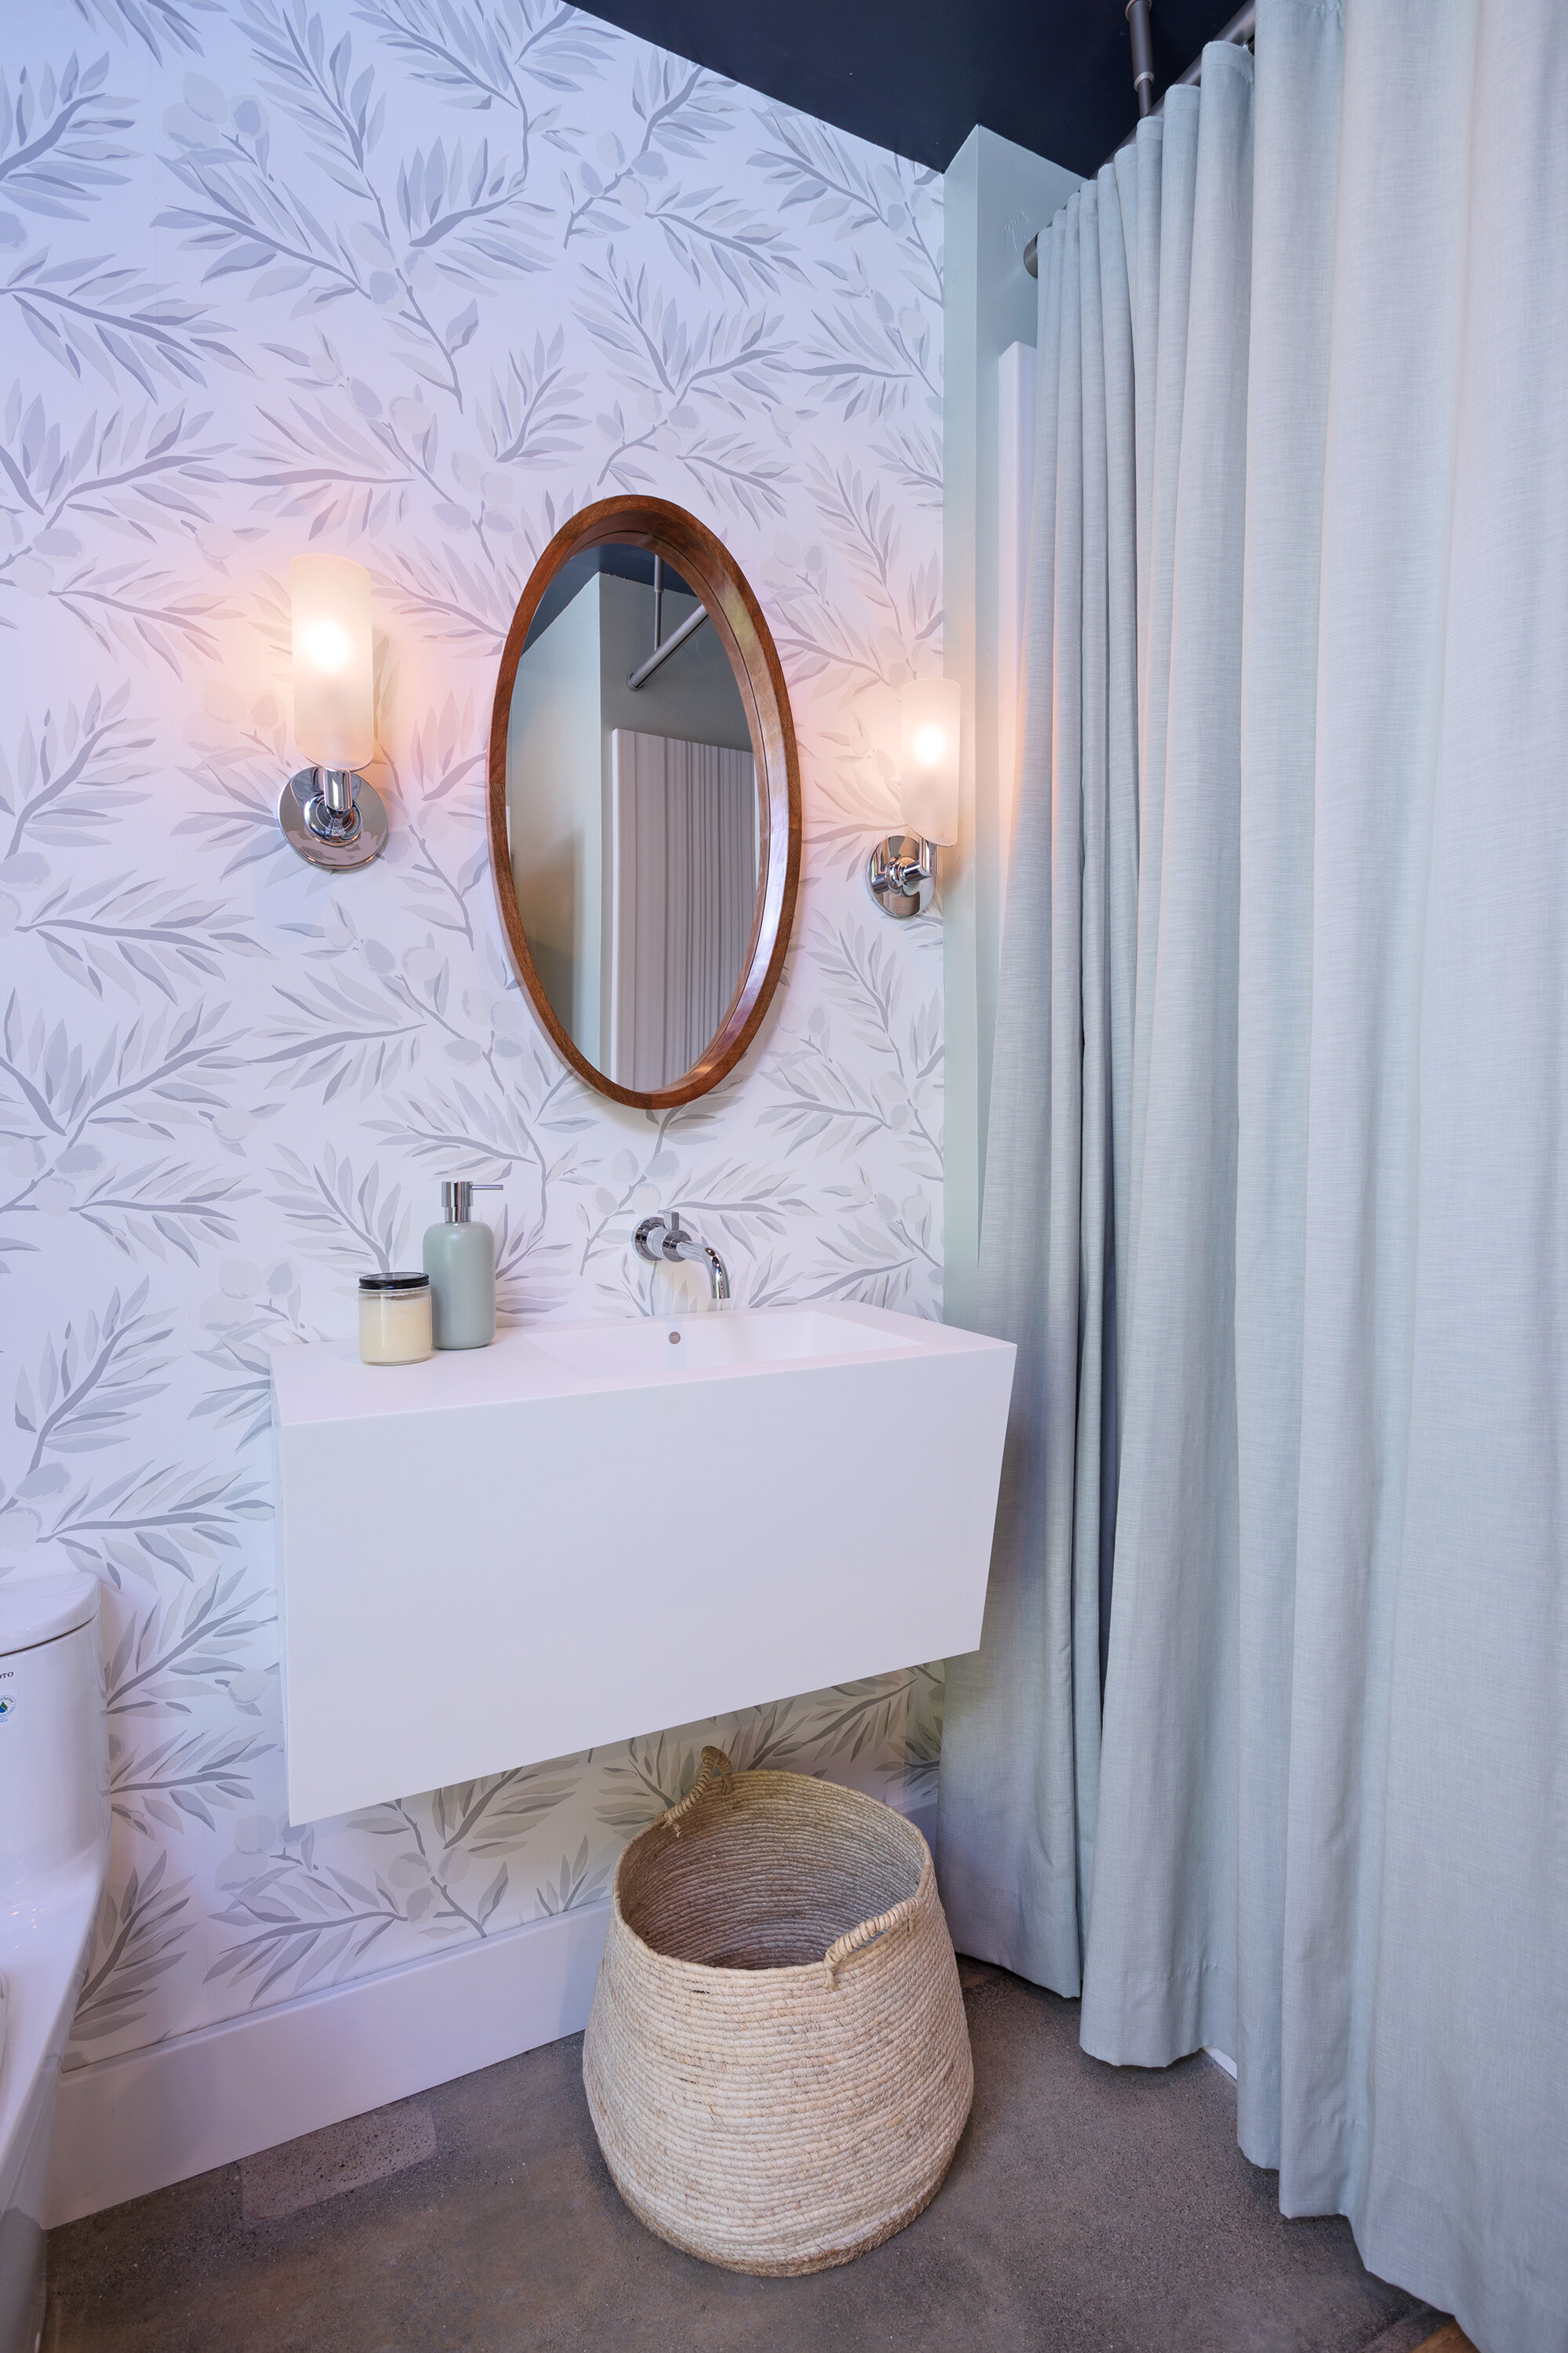 This was the Pool House bathroom we did for the Showhouse last year. We selected a subtle branch and leaf motif.